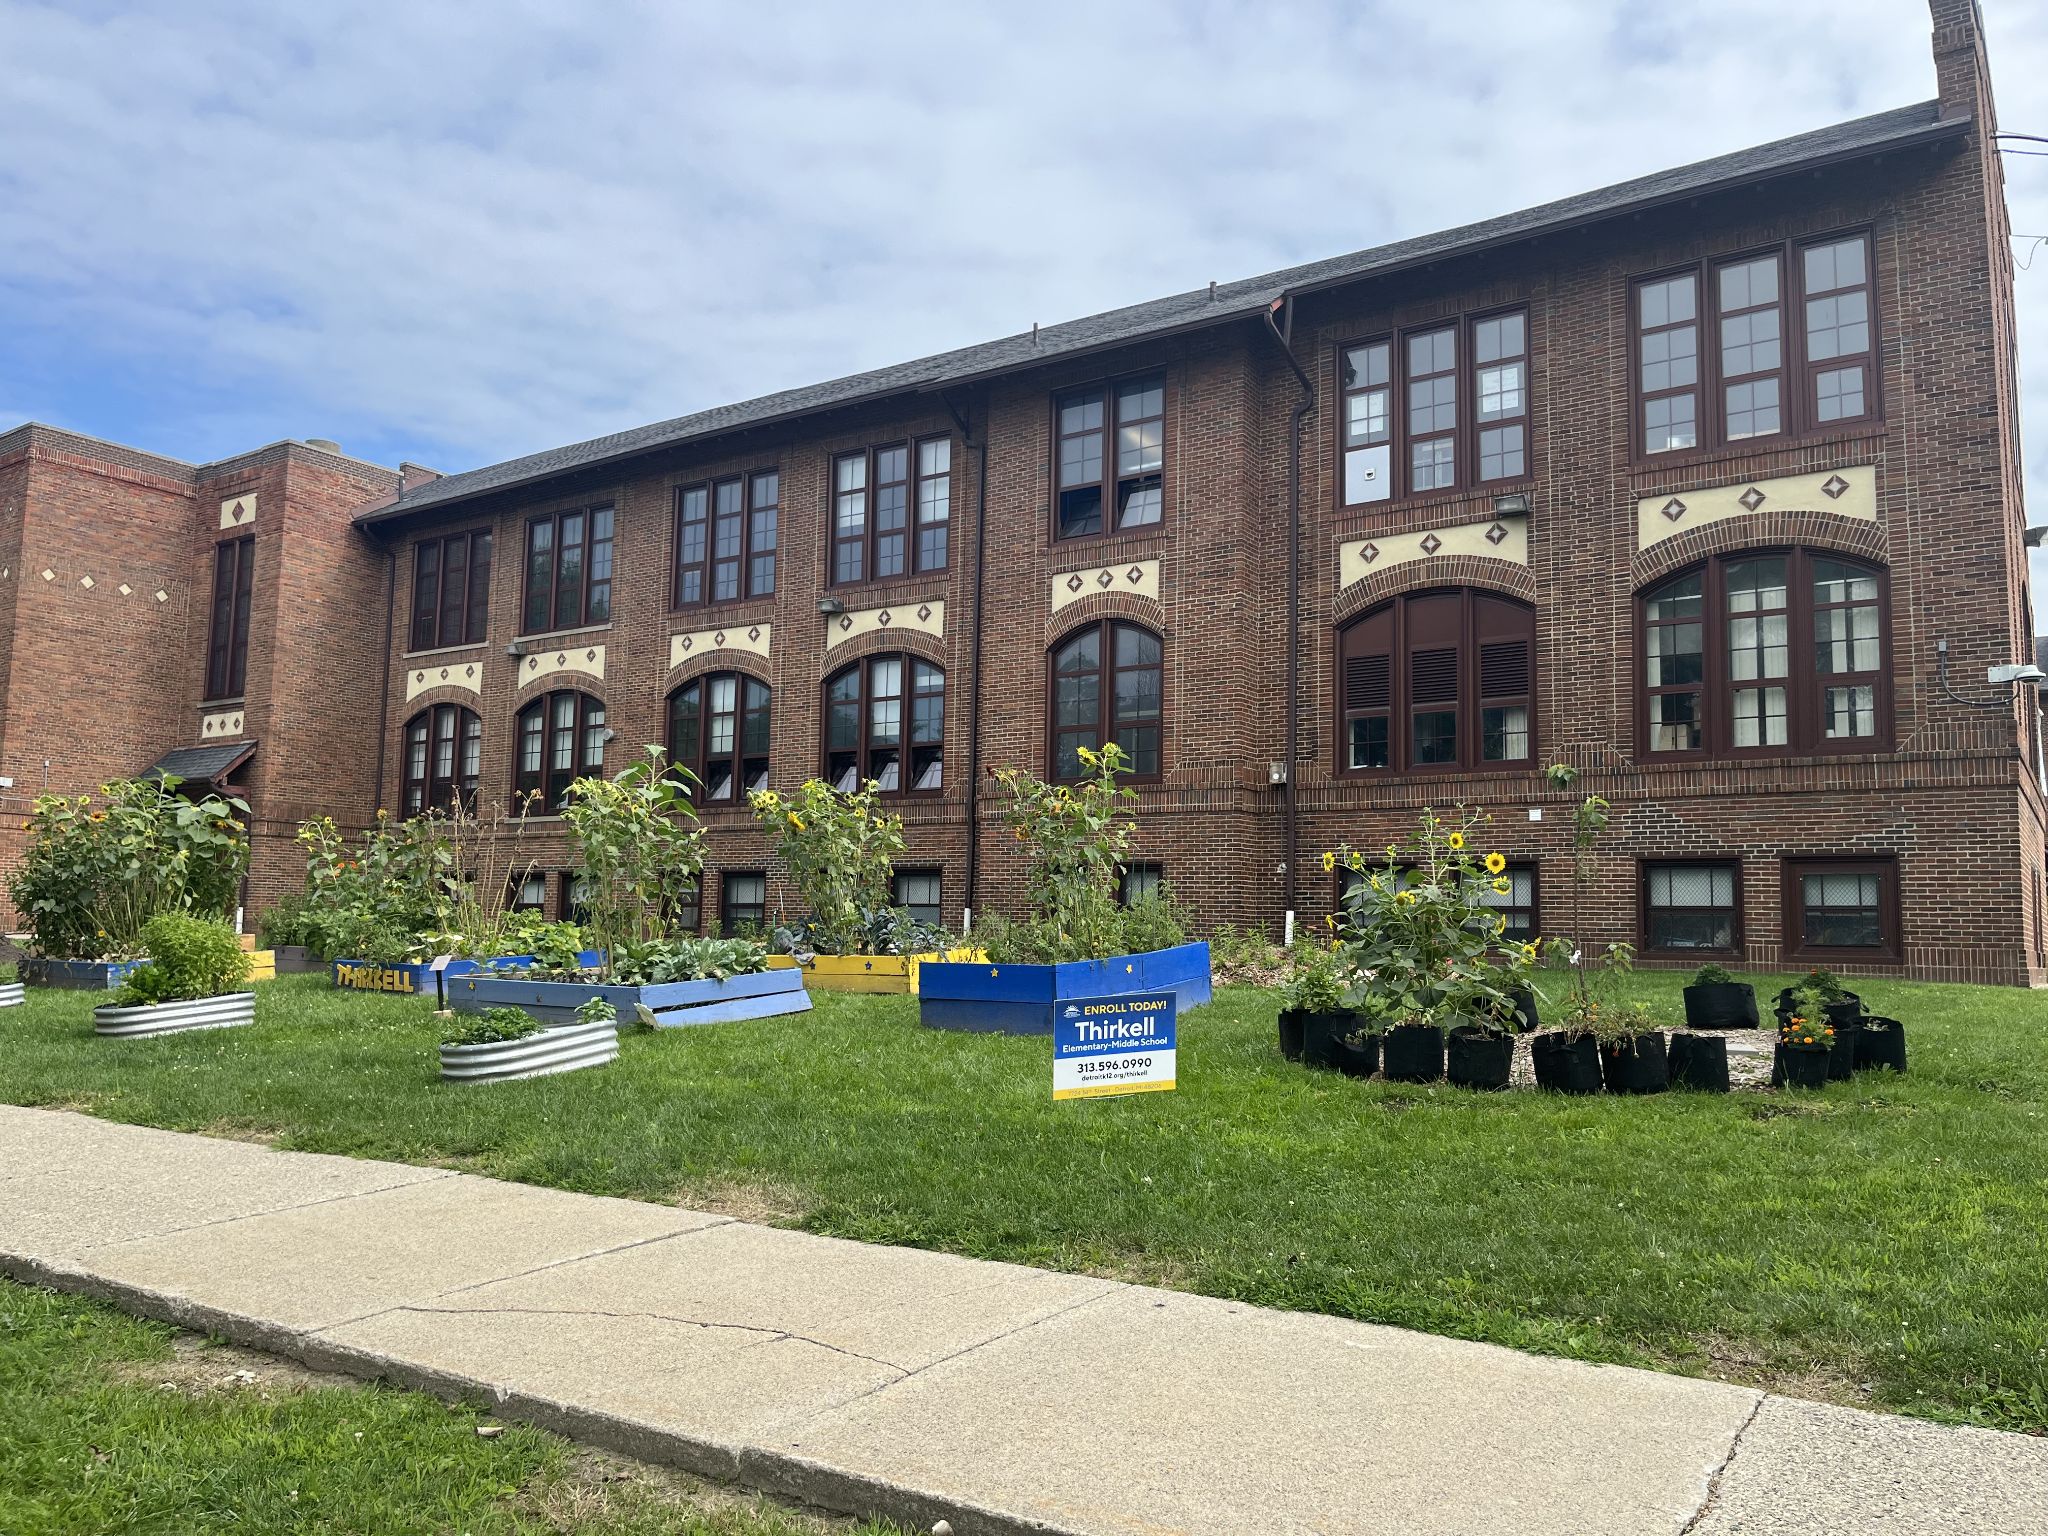 The TSO-UP program helped teacher Emma Howland-Bolton reimagine her schoolyard at Thirkell Elementary-Middle School in Detroit. Her students learn outdoors, raise flowers and vegetables, and helped build a rain garden among other projects.